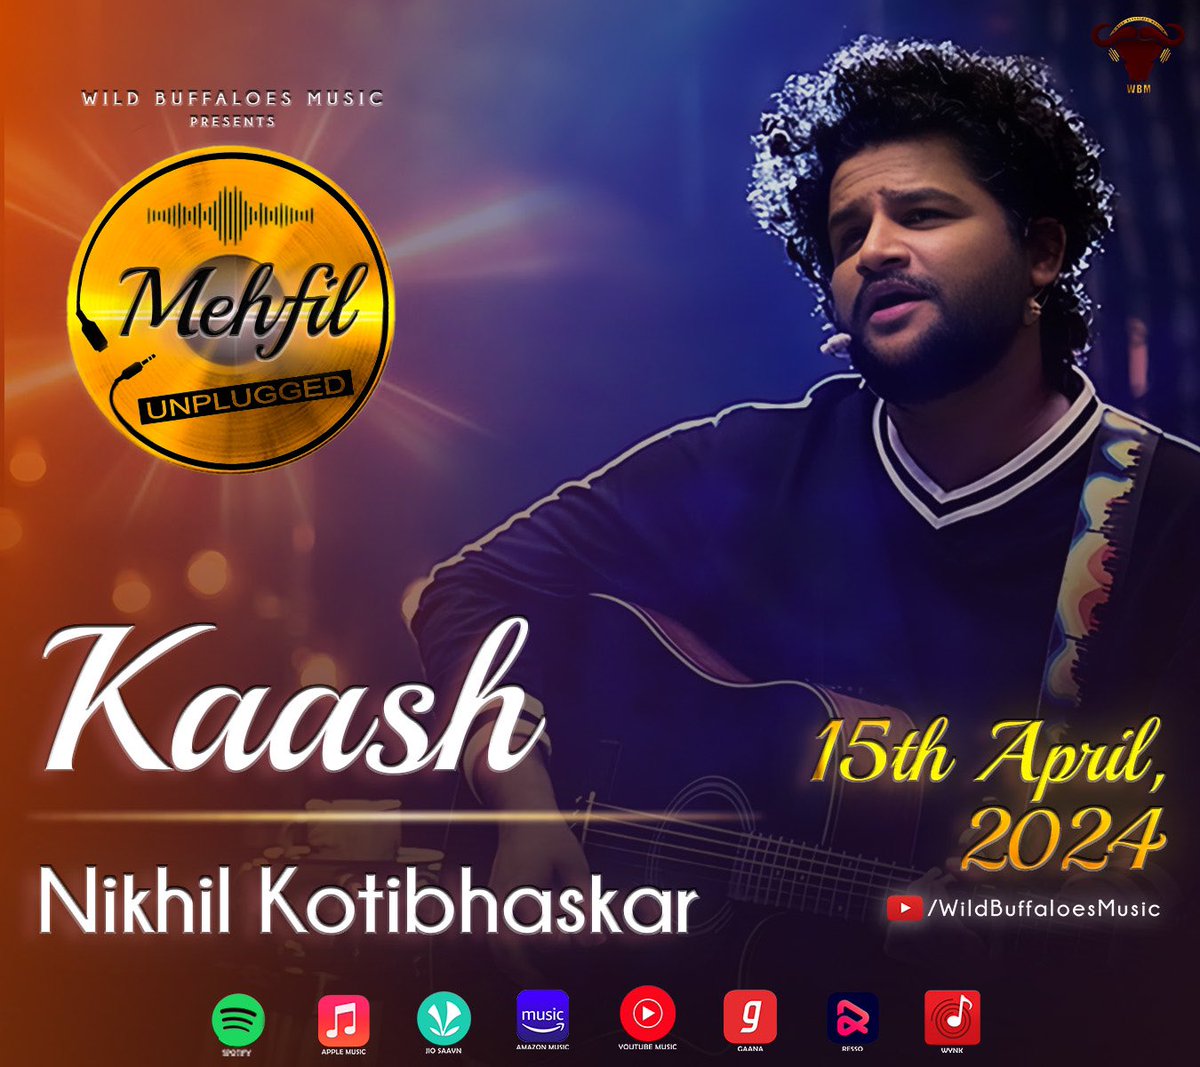 RELEASING ON 15th April, 2024 on the Wild Buffaloes Music YouTube channel❗️

Wild Buffaloes Music ( @WildBuffaloesM ) presents ‘Kaash’, a romantic song that paints a picture of true, unrequited love. 💭

#newsong #releasingsoon #staytuned #WildBuffaloesMusic